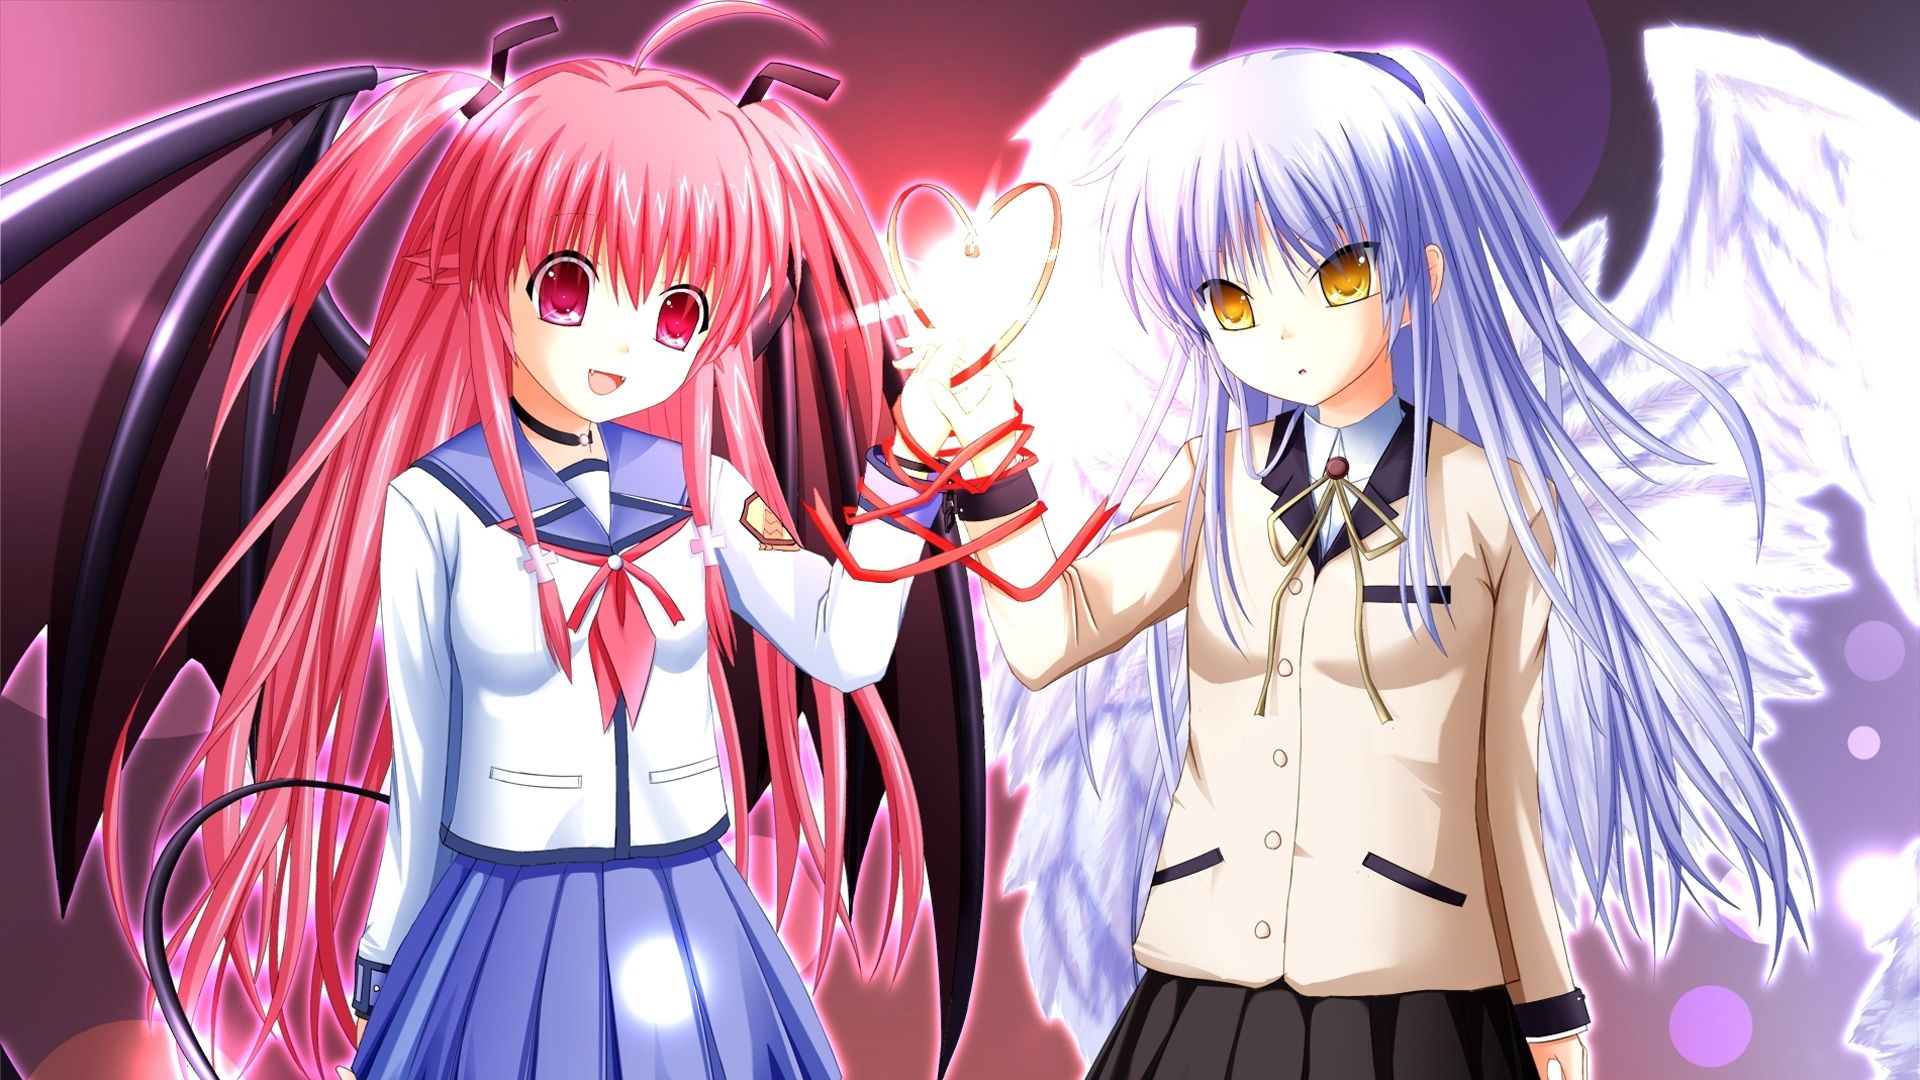 Download wallpaper from anime Angel Beats! with tags: Kanade Tachibana, Microsoft, Yui